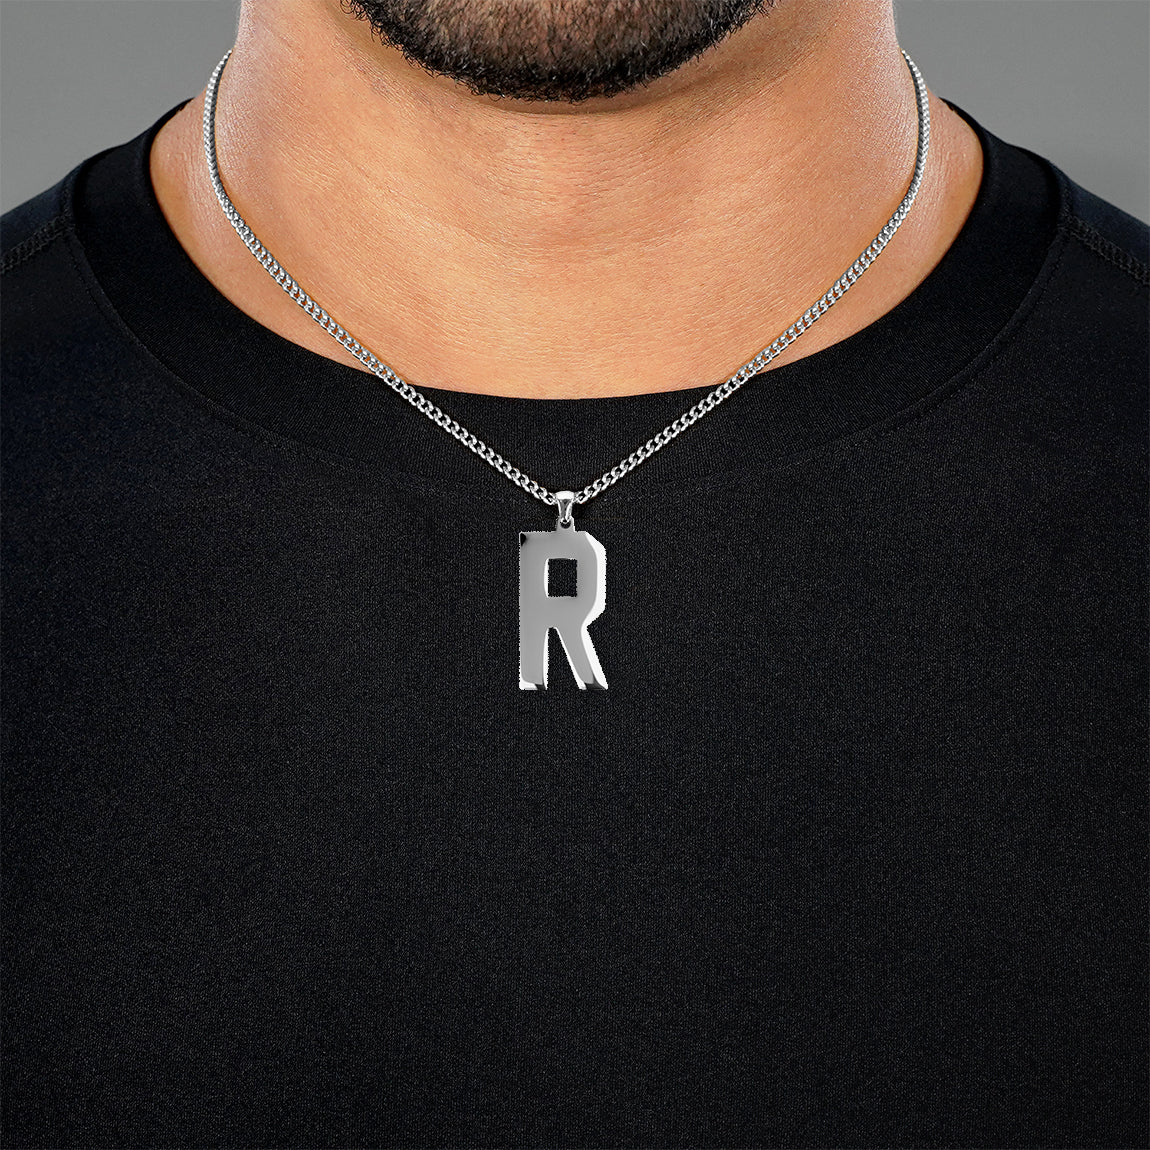 R Letter Pendant with Chain Necklace - Stainless Steel